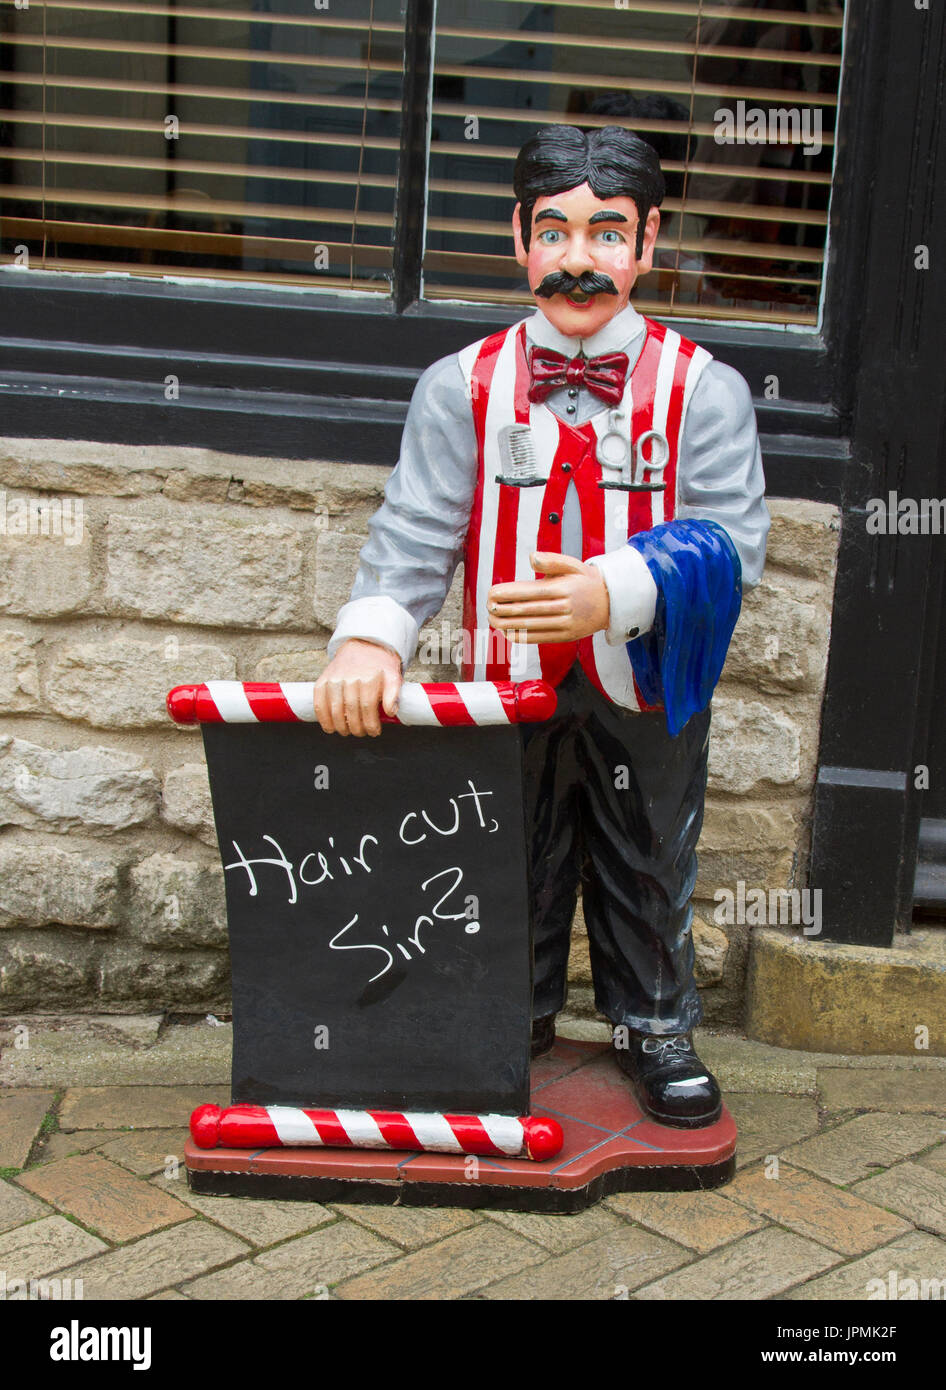 Unique, colourful, and humorous sign on footpath outside barber's shop with  statue of old fashioned barber asking 'A hair cut Sir?' Stock Photo - Alamy